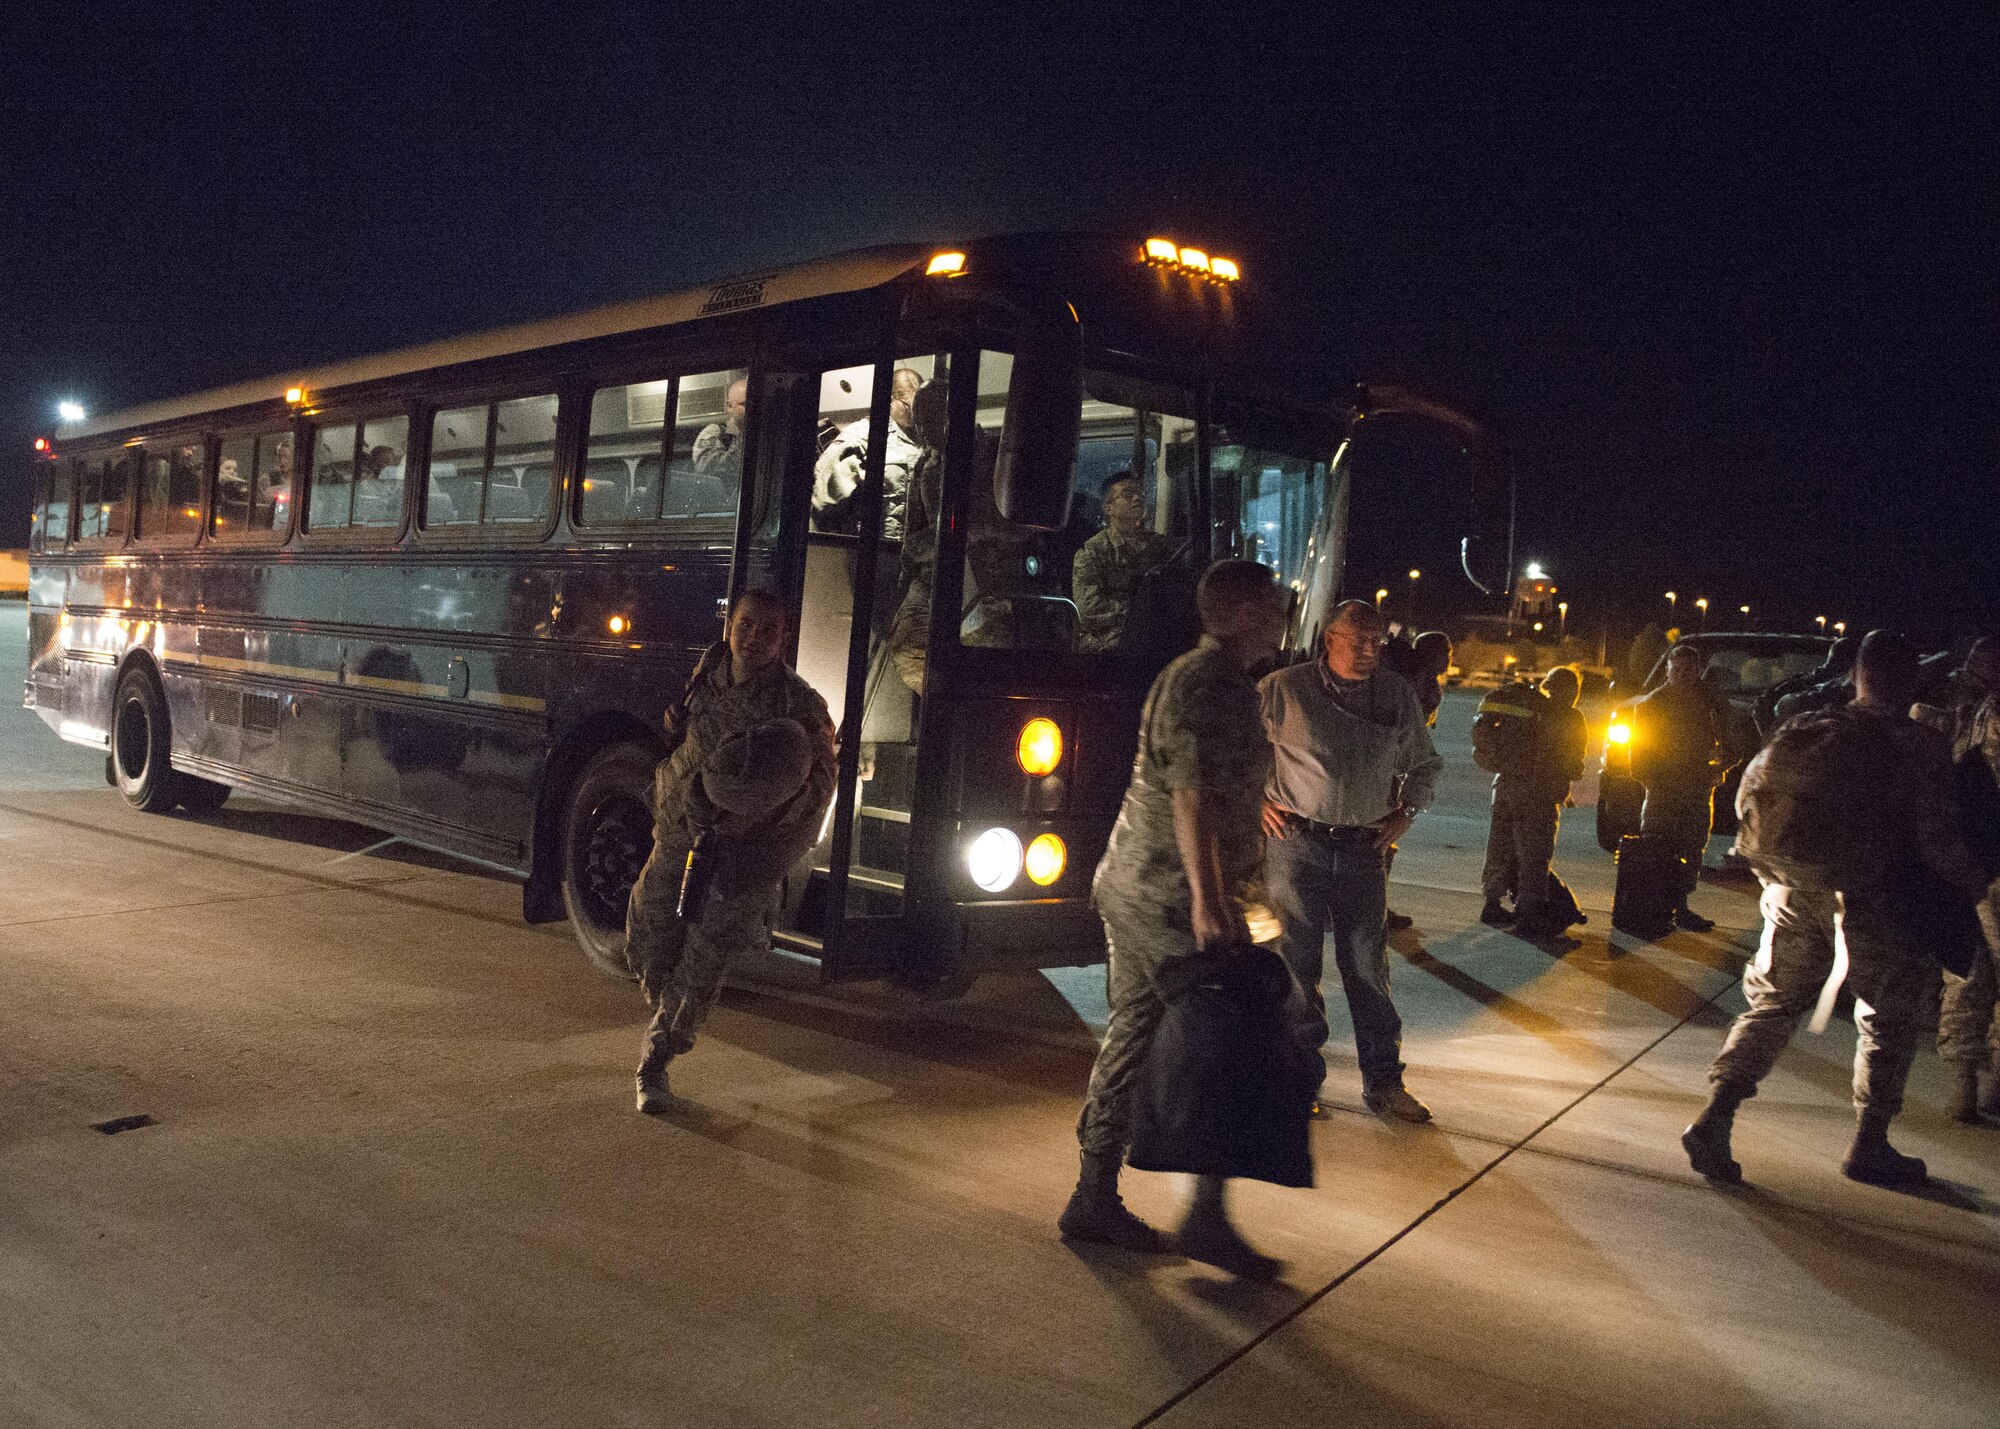 Members of the 726th Air Control Squadron depart from buses before boarding a plane to deploy from Mountain Home Air Force Base, Idaho, Oct. 10, 2016. The 726th ACS is a tenant unit stationed at Mountain Home AFB and assigned to the 552nd Air Control Group at Tinker AFB. The squadron is responsible for mobile, decentralized command and control of joint operations by conducting threat warning, battle management, theater missile defense, weapons control, combat identification and strategic communications. (U.S. Air Force photo by Airman 1st Class Chester Mientkiewicz/Released)